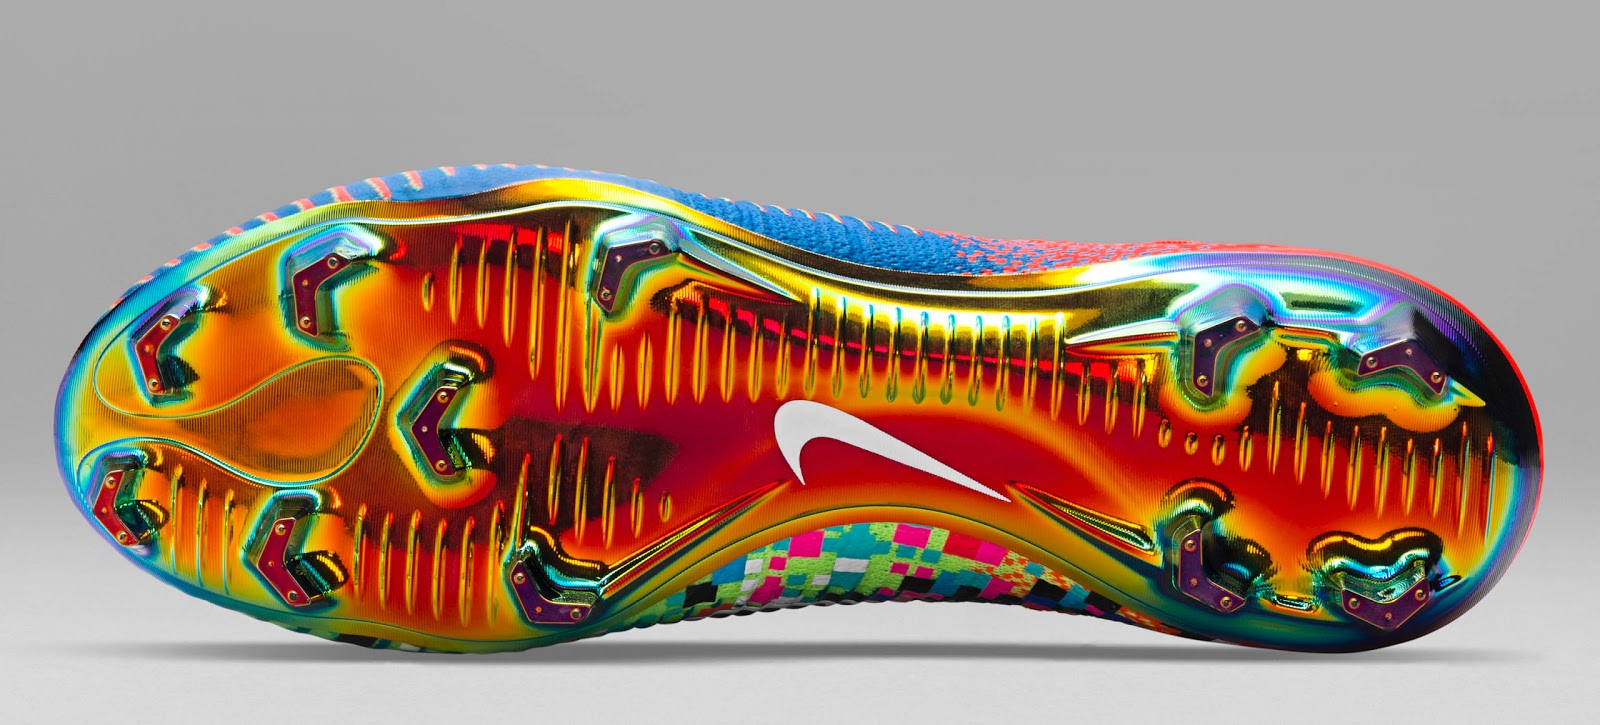 limited-edition-nike-mercurial-superfly-x-ea-sports-boots%2B%25286%2529.jpg